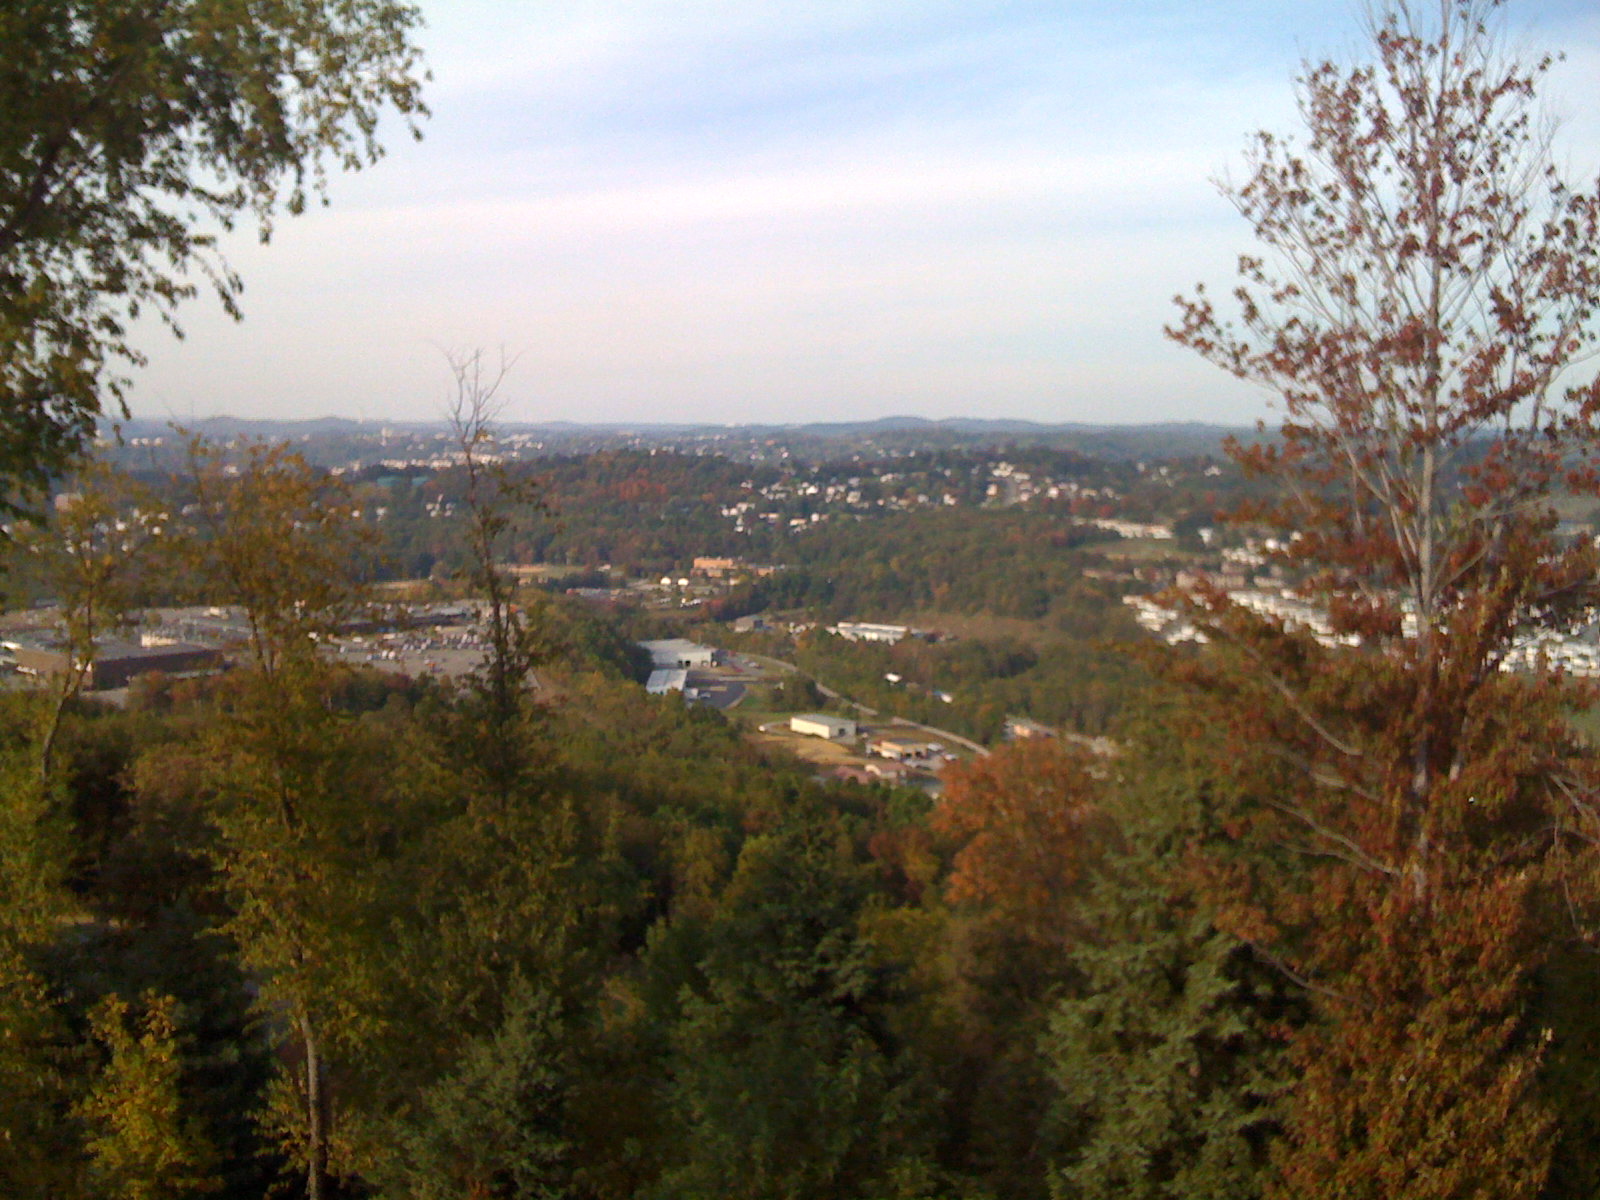 the view from atop a hill, overlooking the city